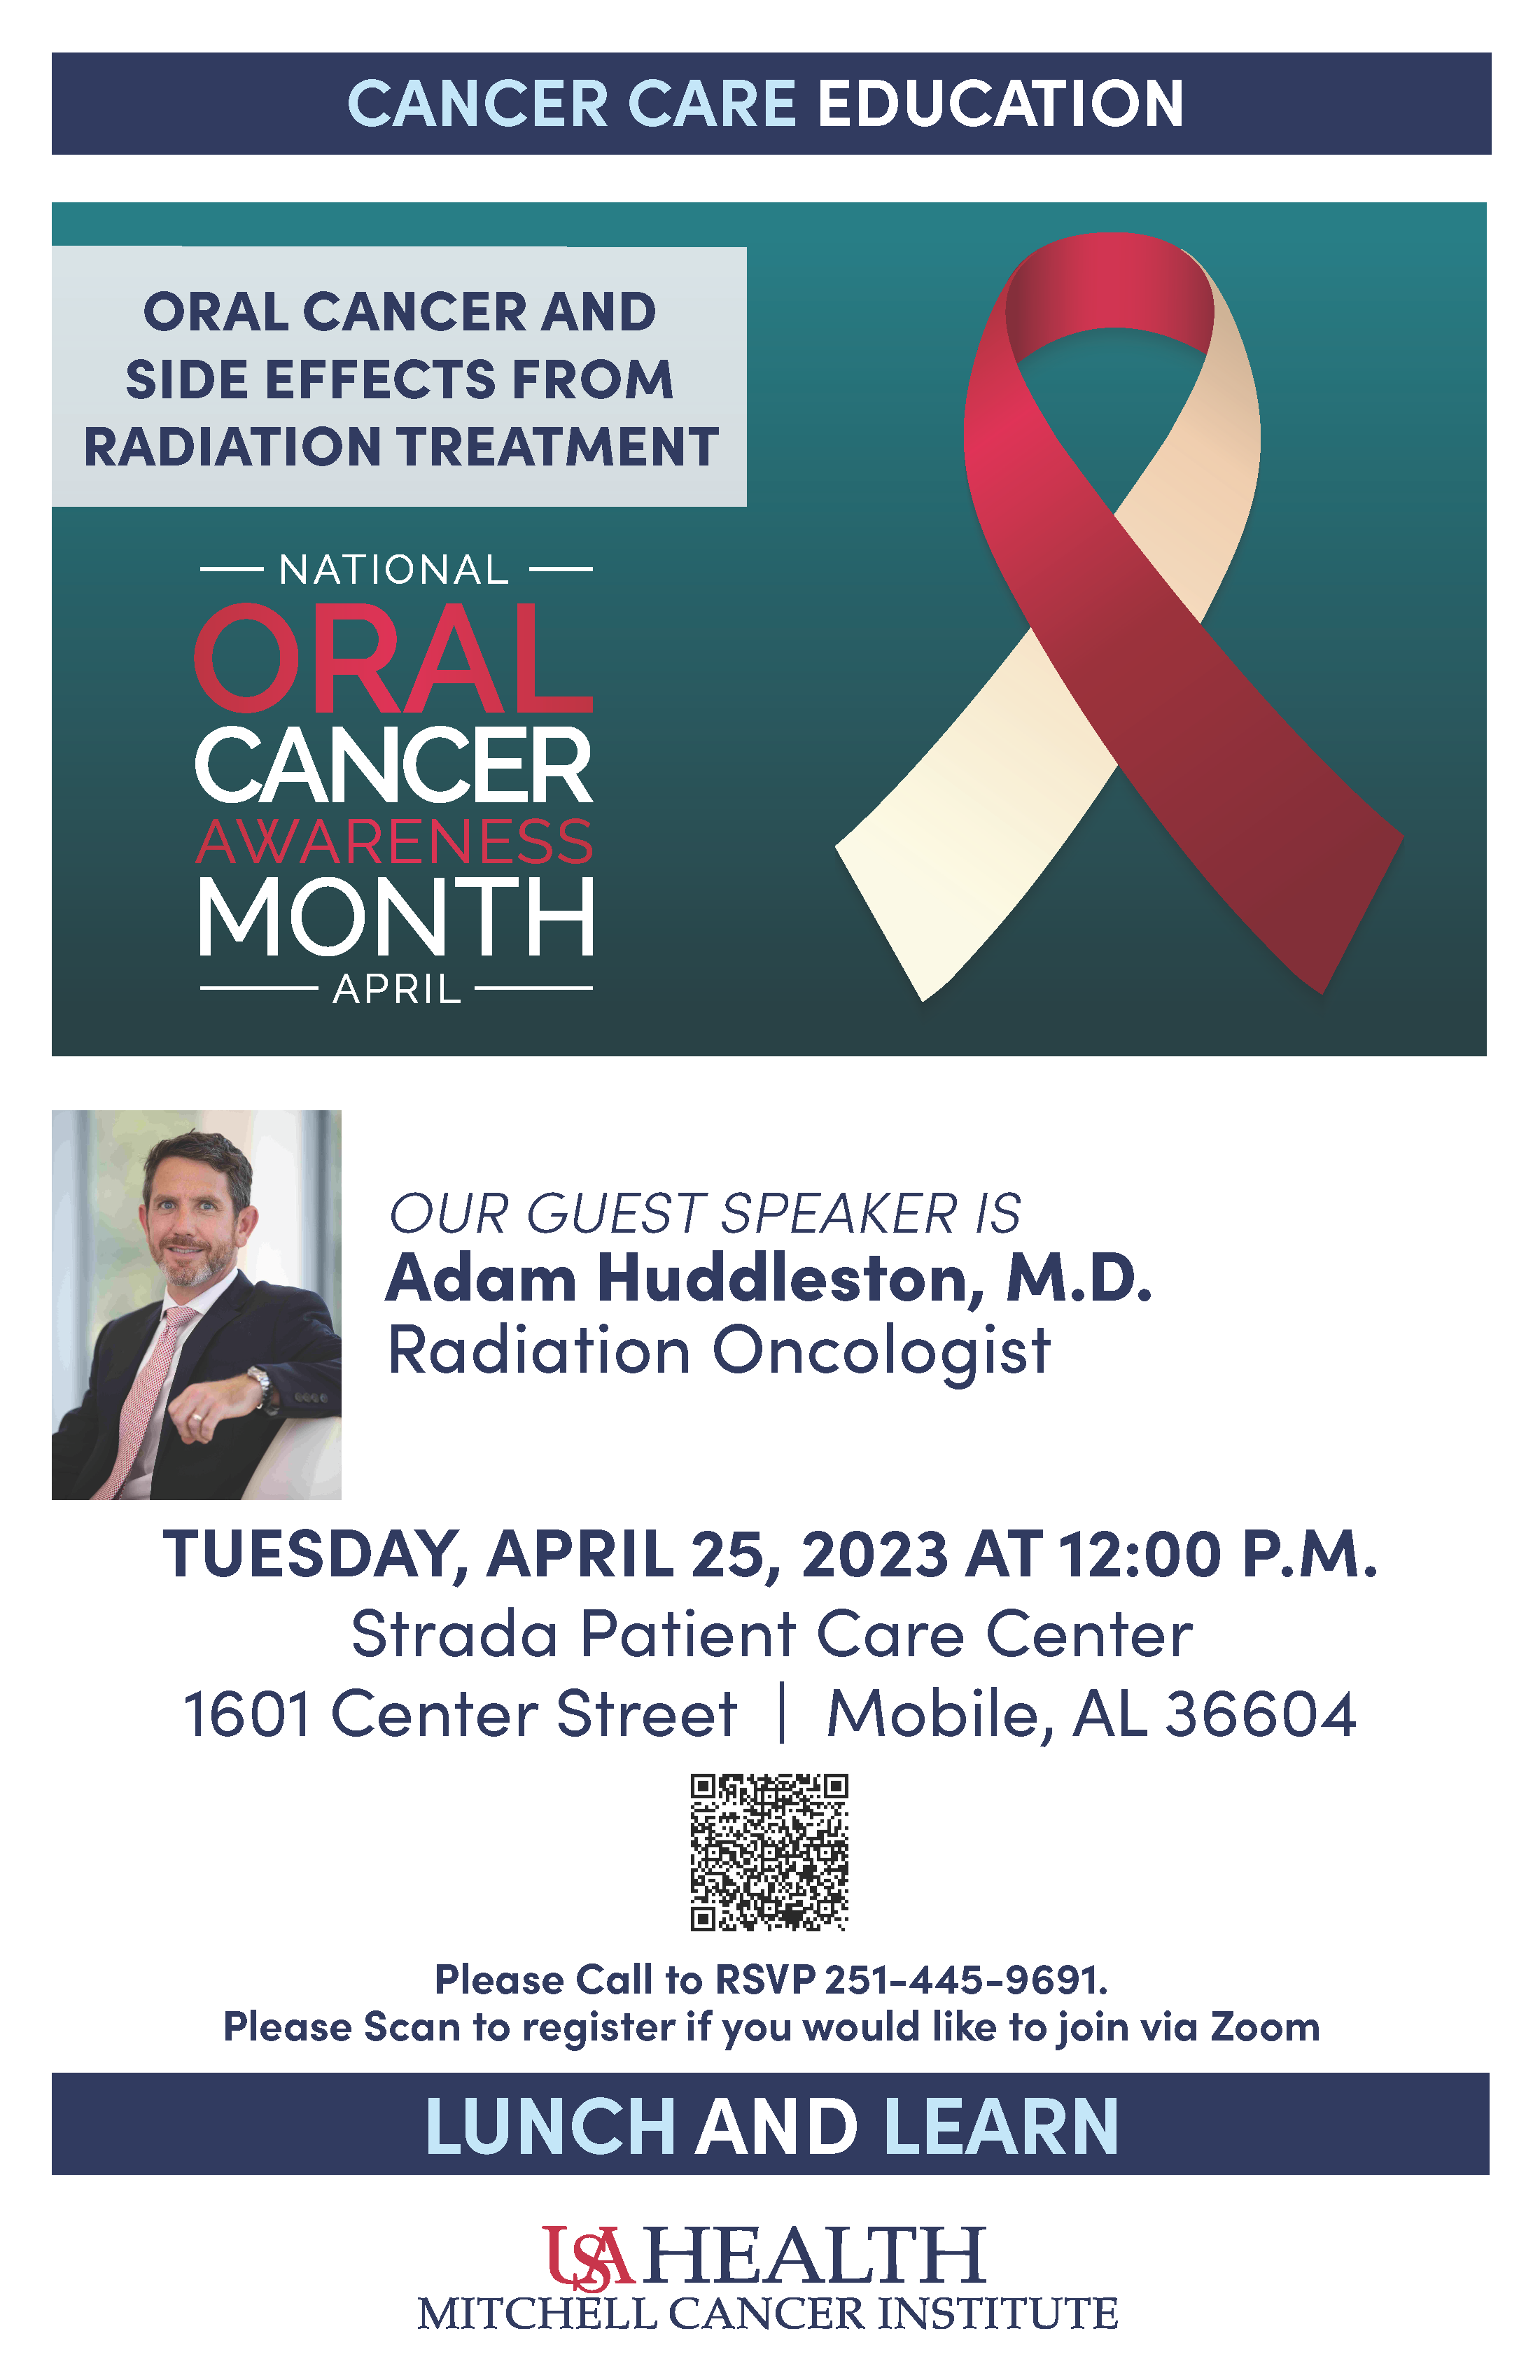 MCI Lunch & Learn: Oral Cancer and Side Effects from Radiation Treatment